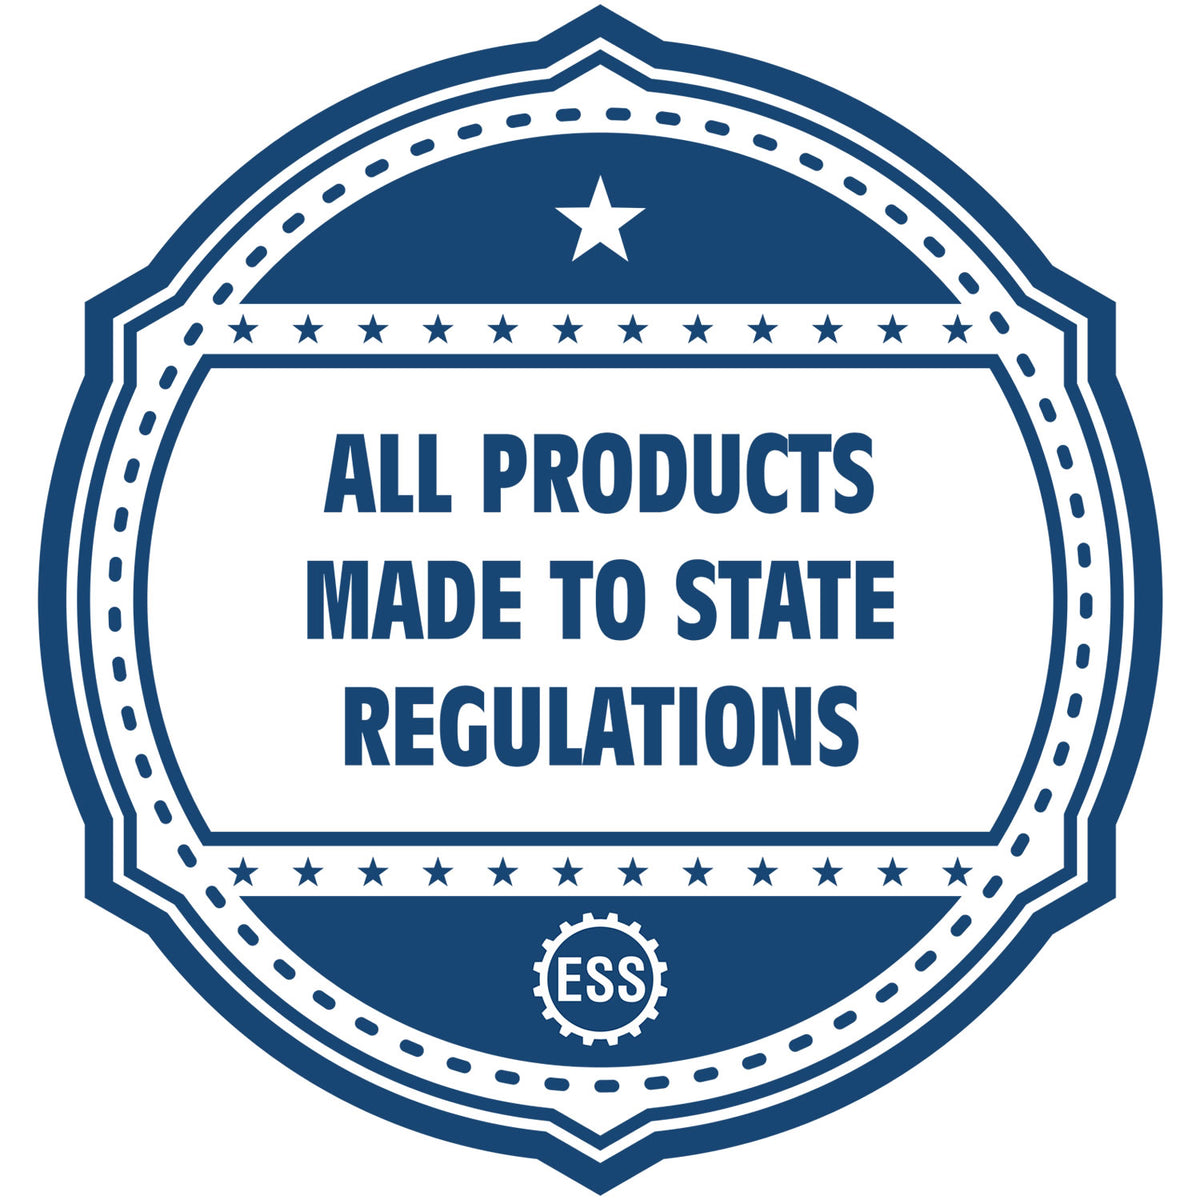 An icon or badge element for the Handheld Vermont Architect Seal Embosser showing that this product is made in compliance with state regulations.